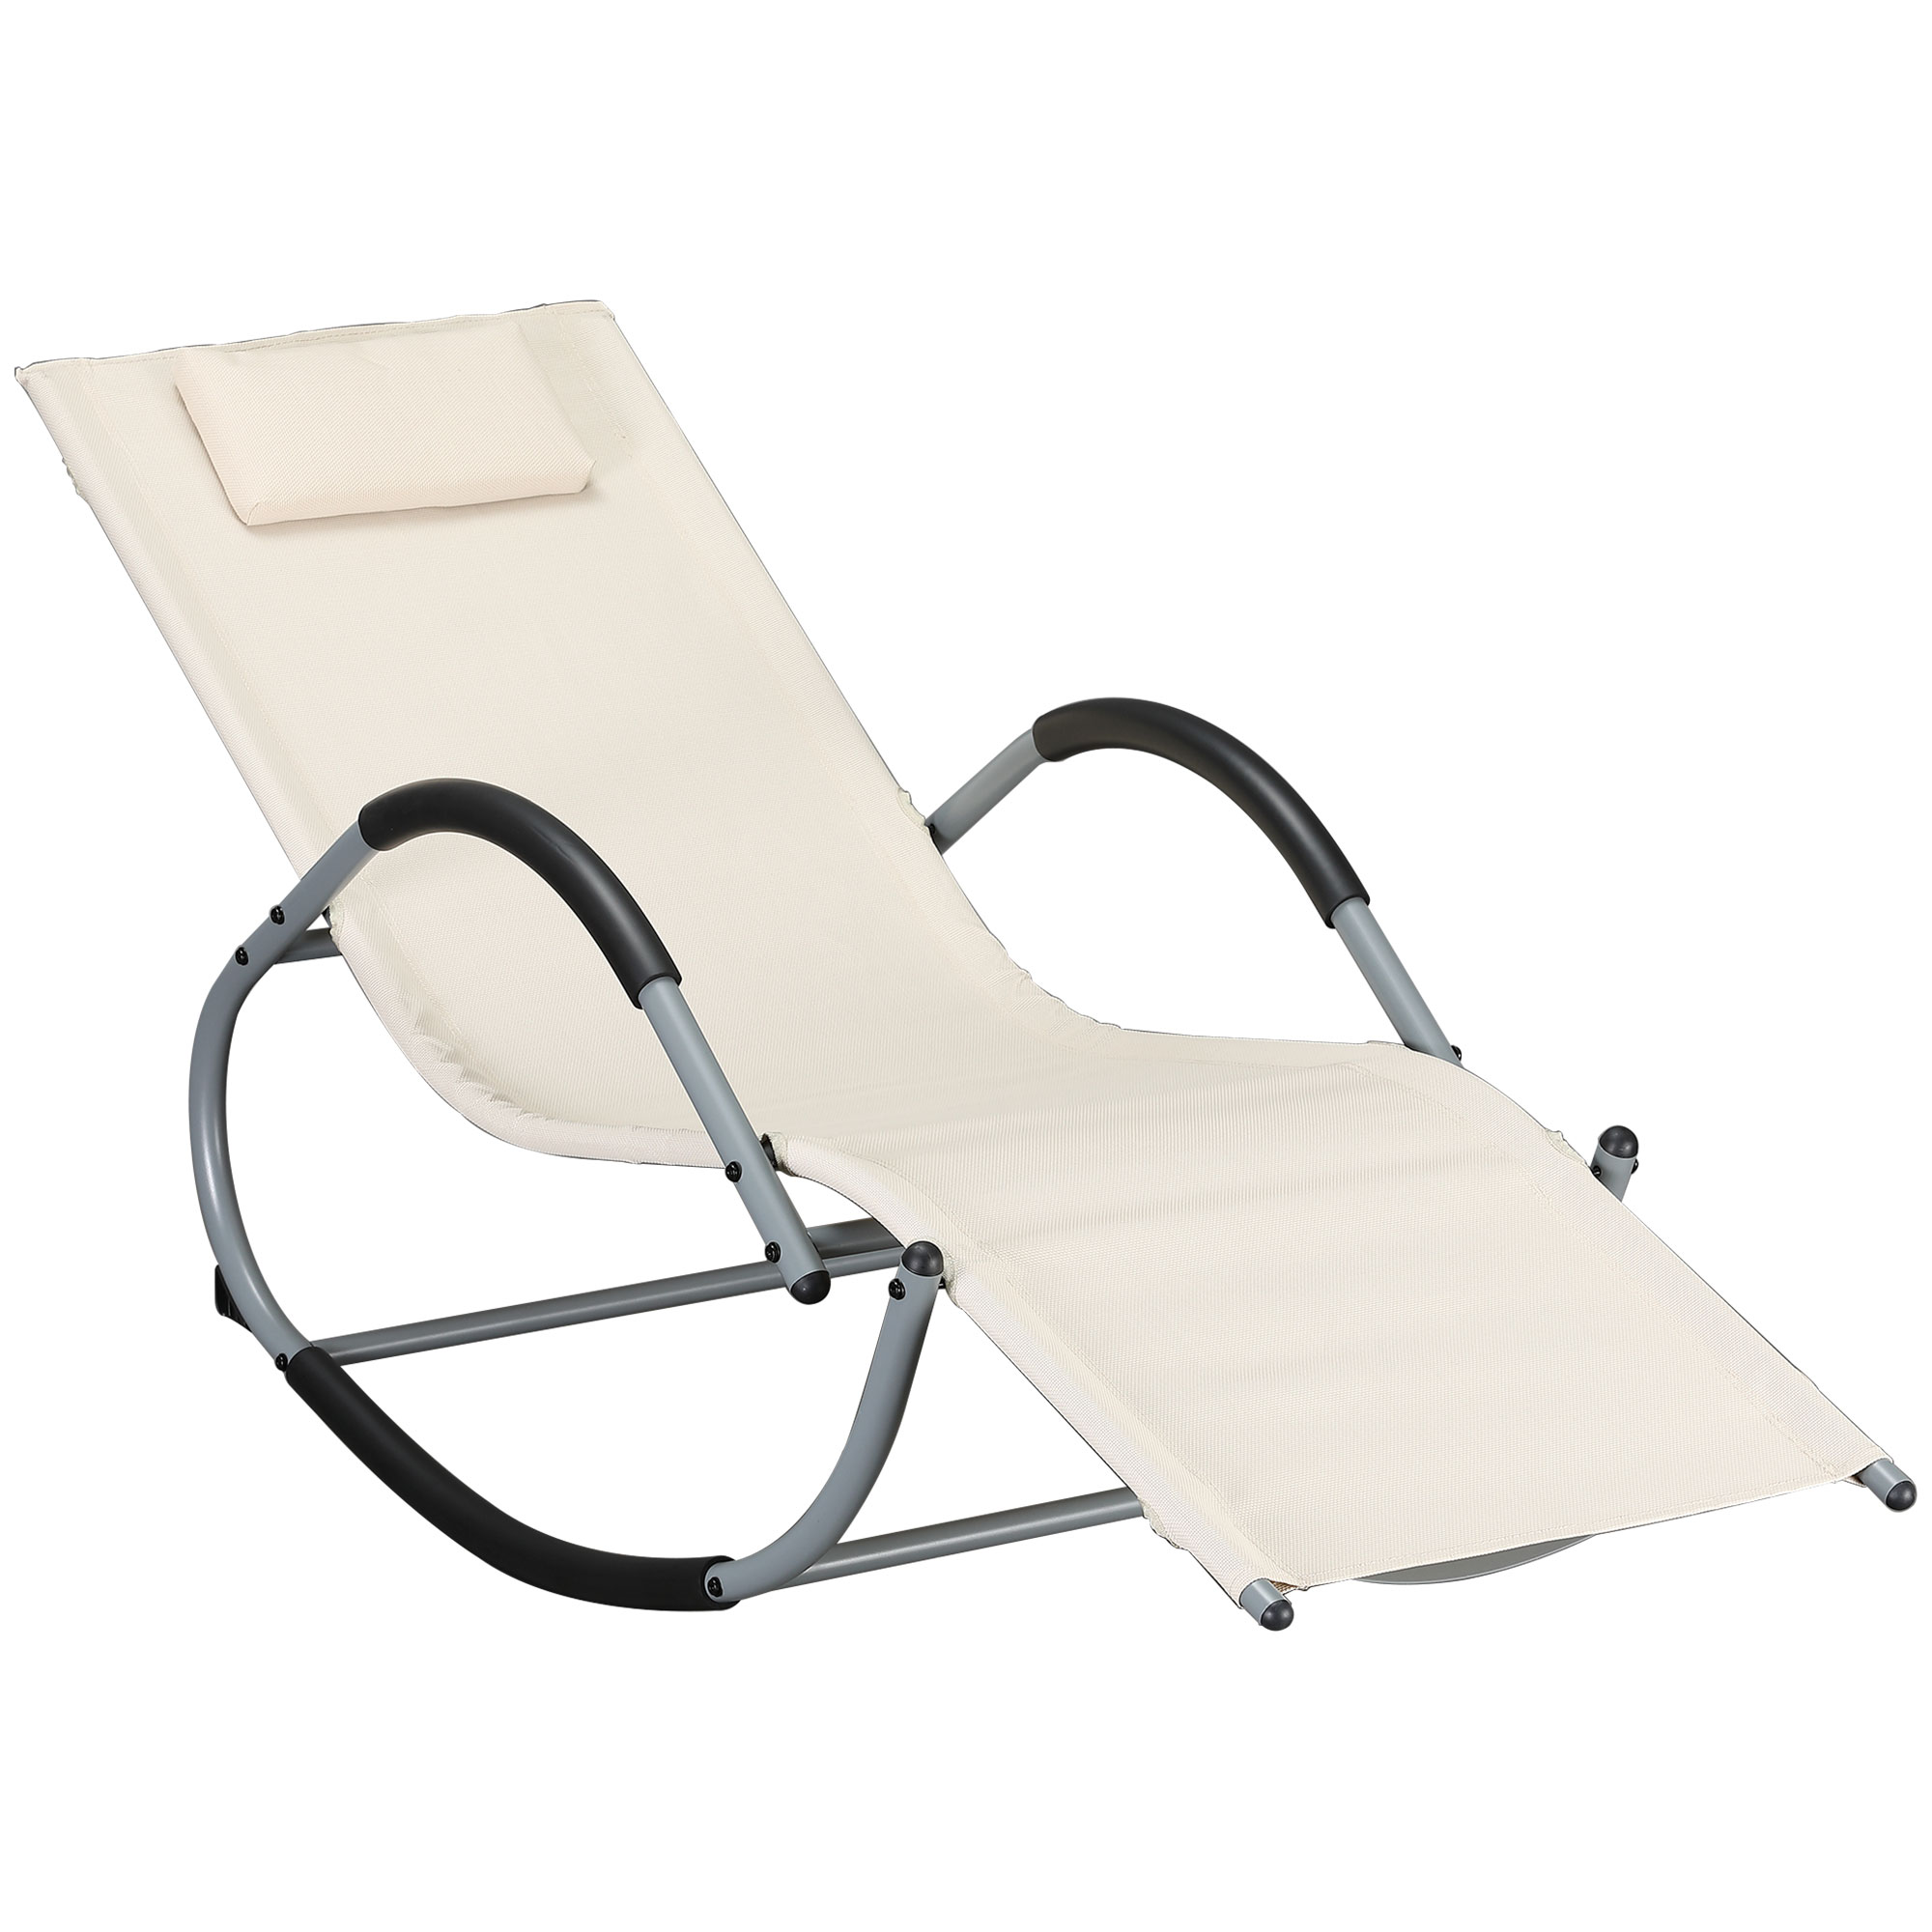 Outsunny Patio Rocking Chair, Weather Resistant w/ Pillow - image 1 of 9